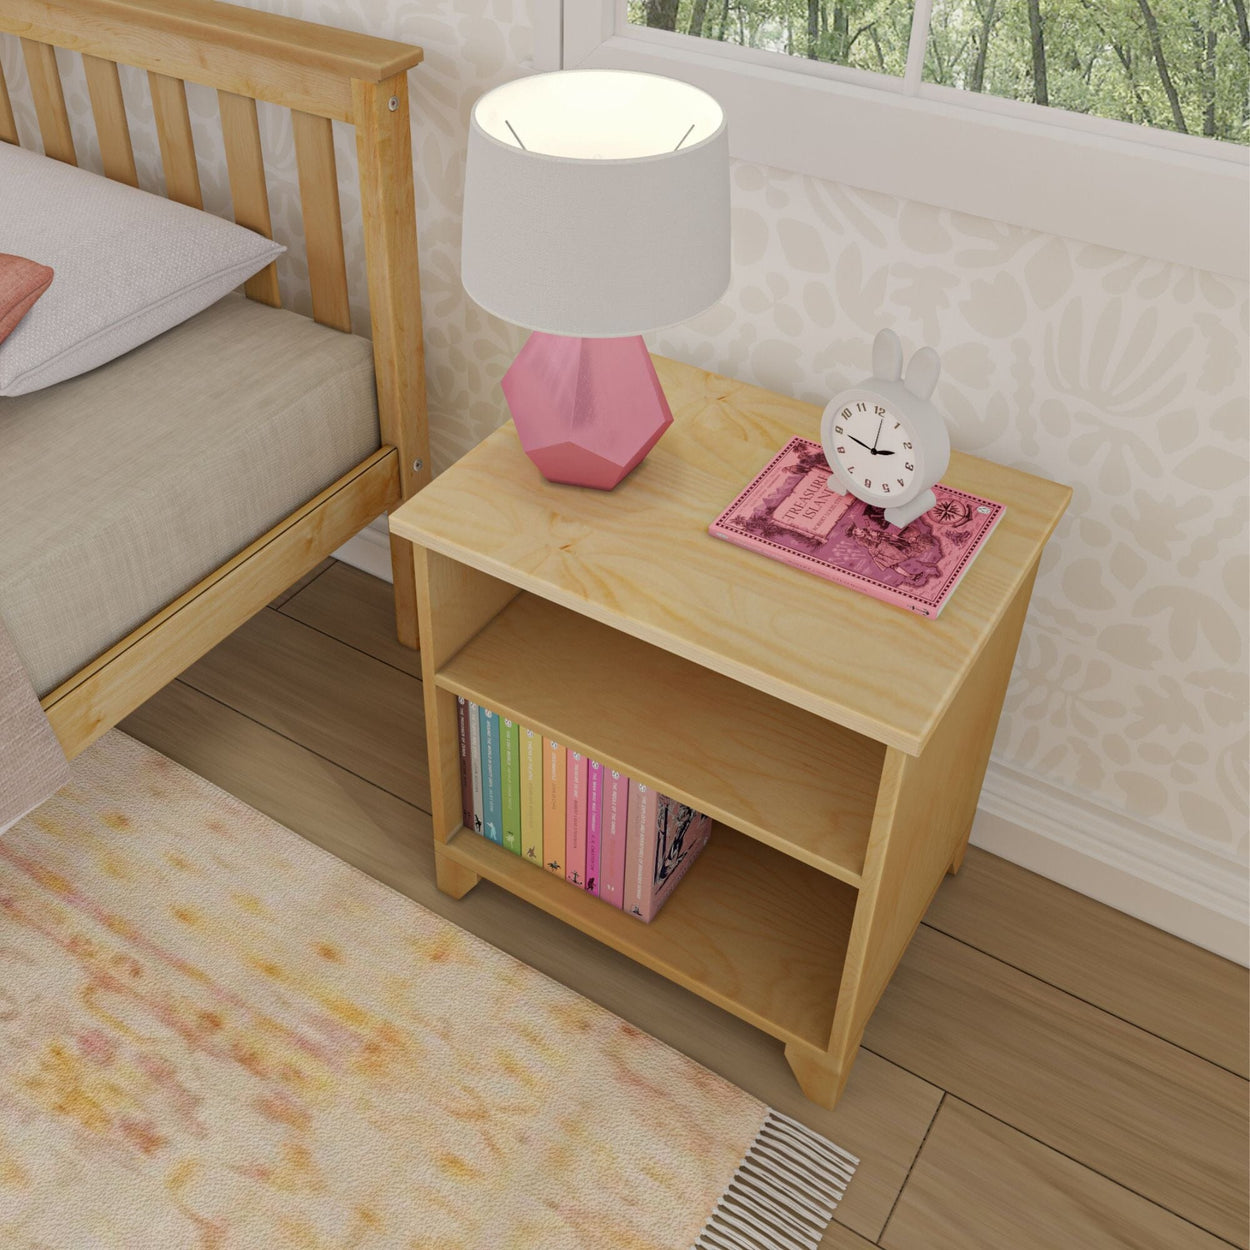 180010-001 : Furniture Nightstand with Shelves, Natural